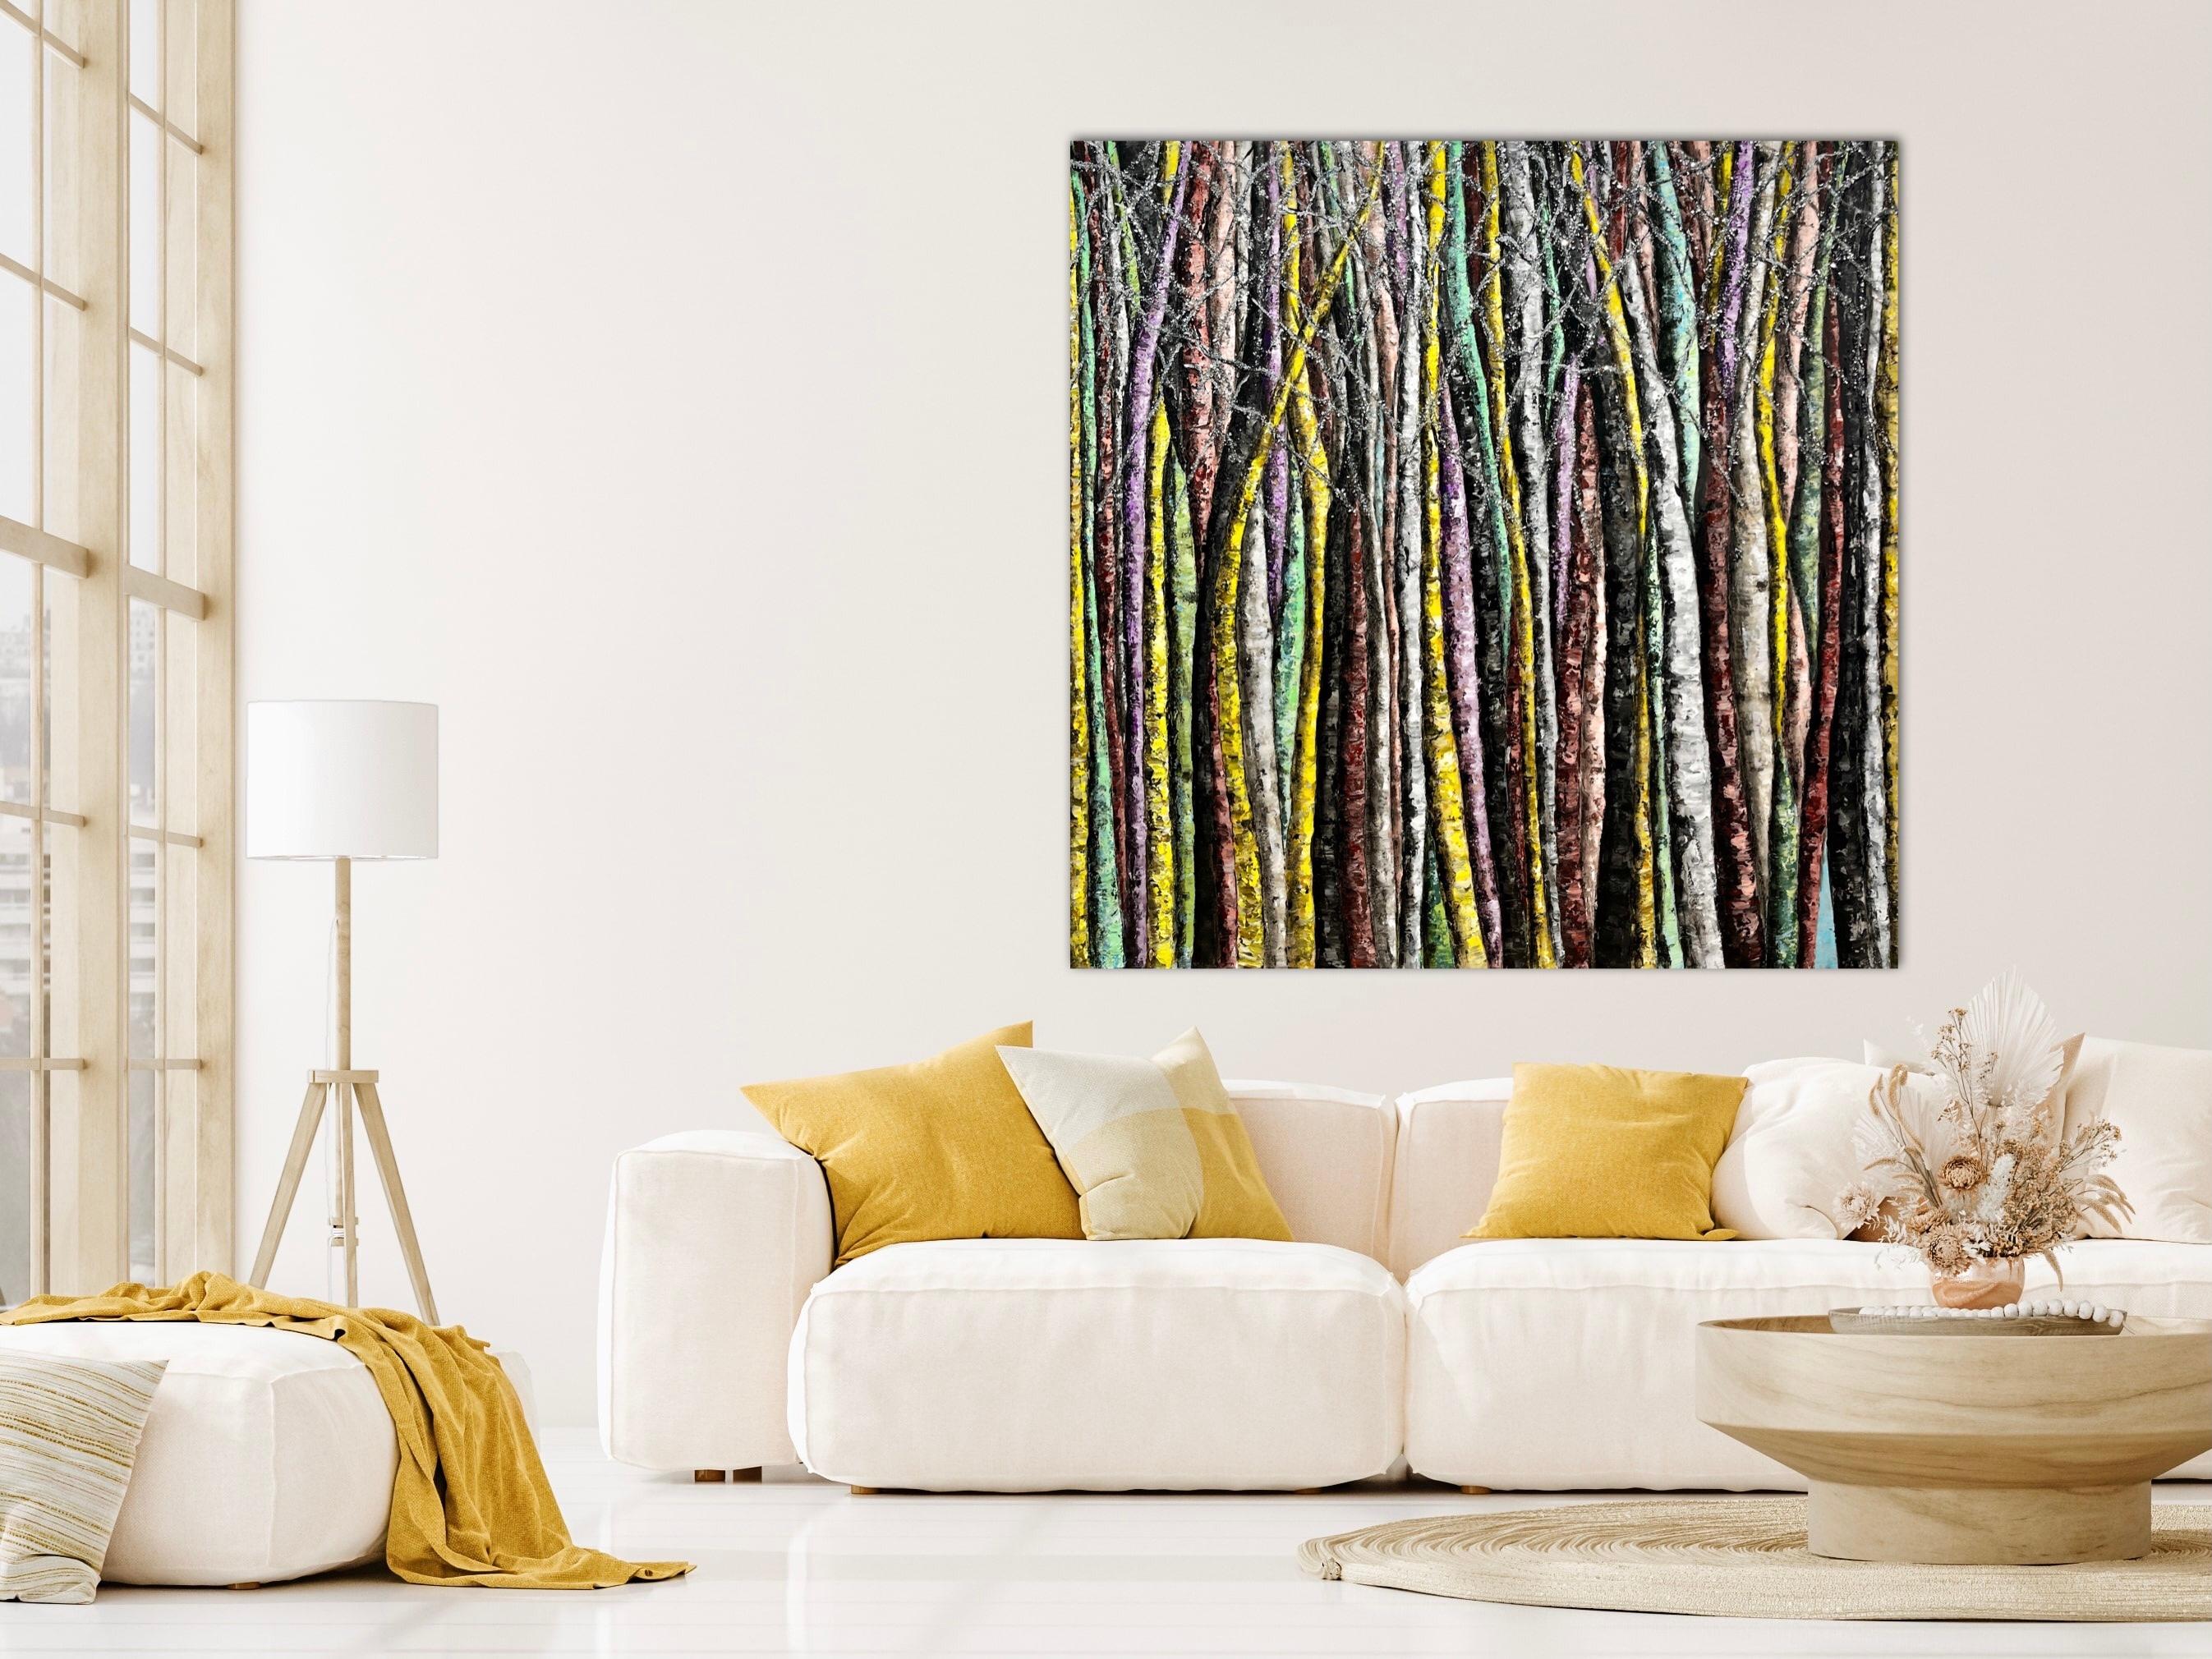 This 48 inch square original textural painting of trees on canvas is wired and ready to hang. It is signed by the artist on the back. The thick layering of colorful paint, resin, glitter and other mixed media elements present a dazzling tactile